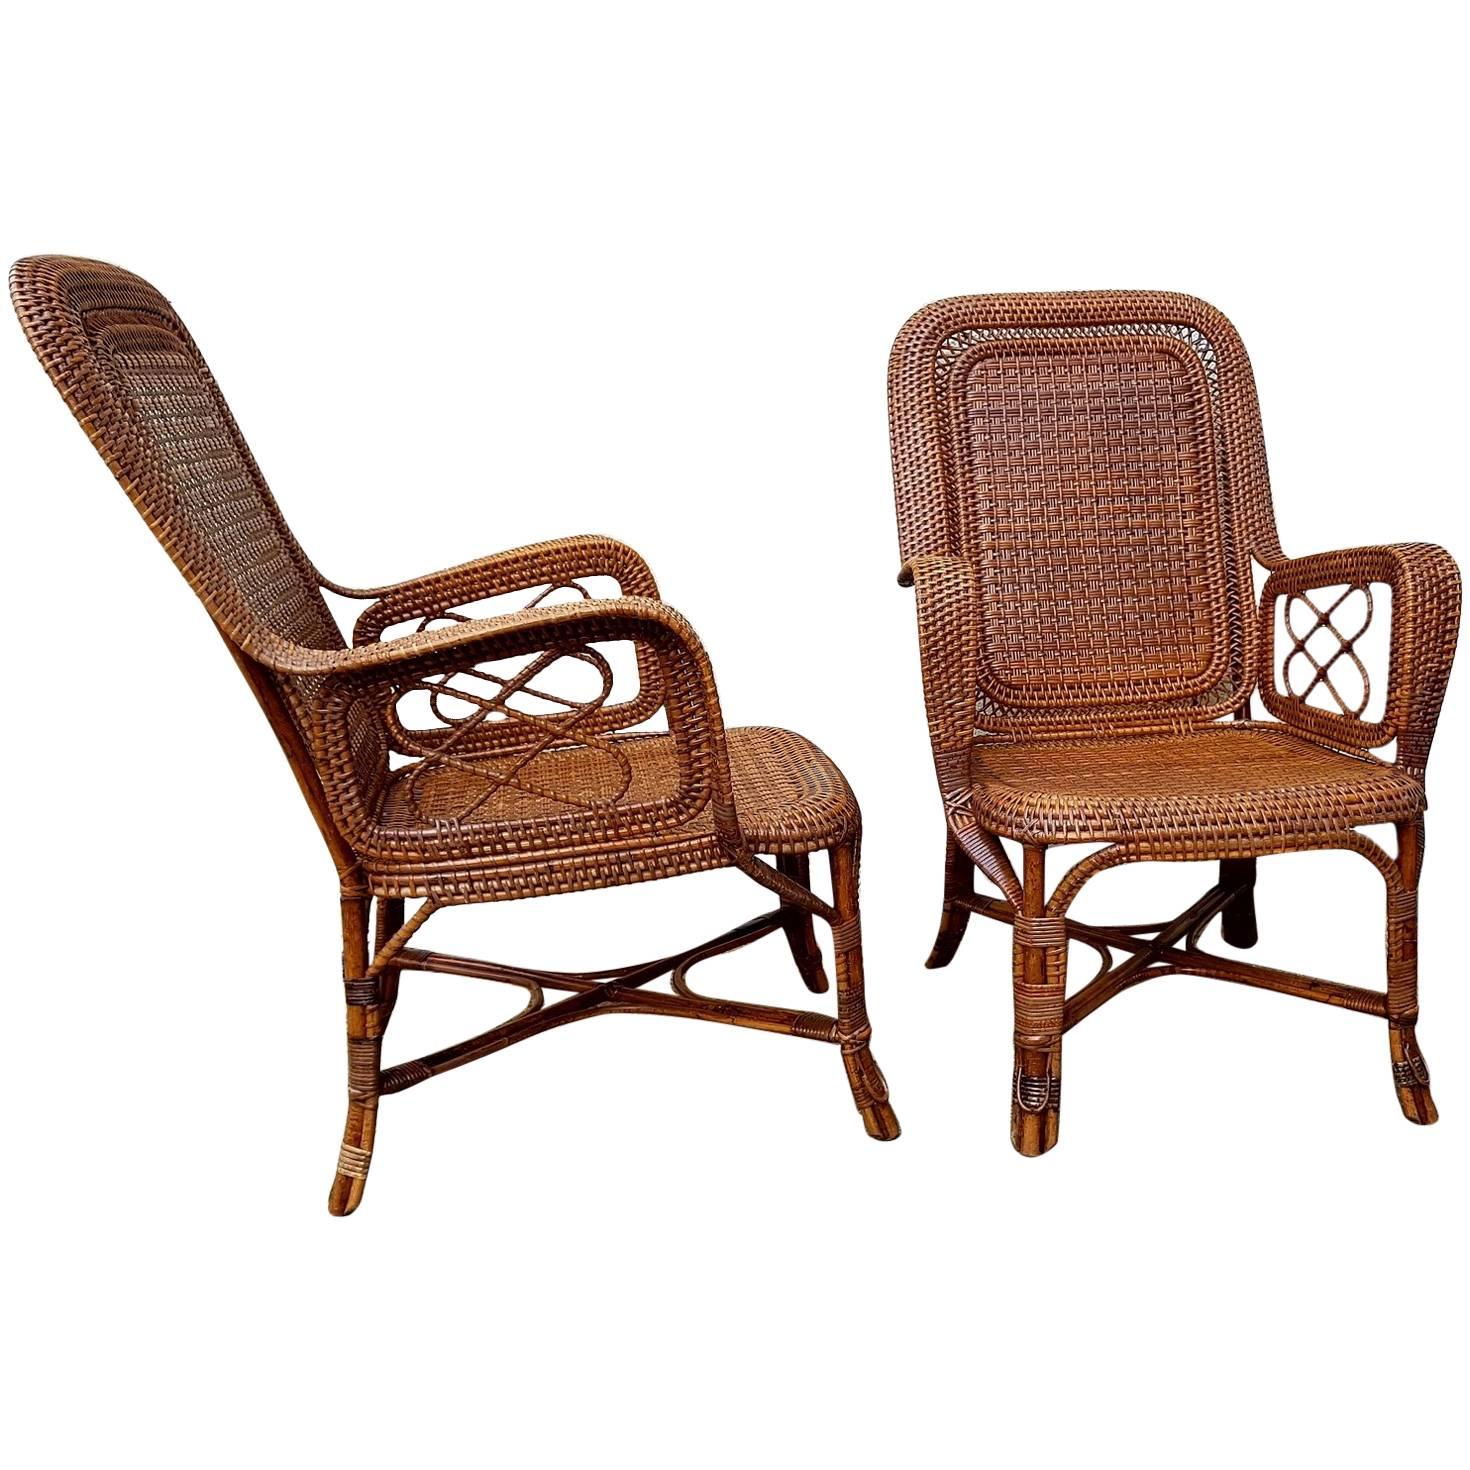 Perret & Vibert, Pair of Large Rattan Armchairs, France, End of 19th Century